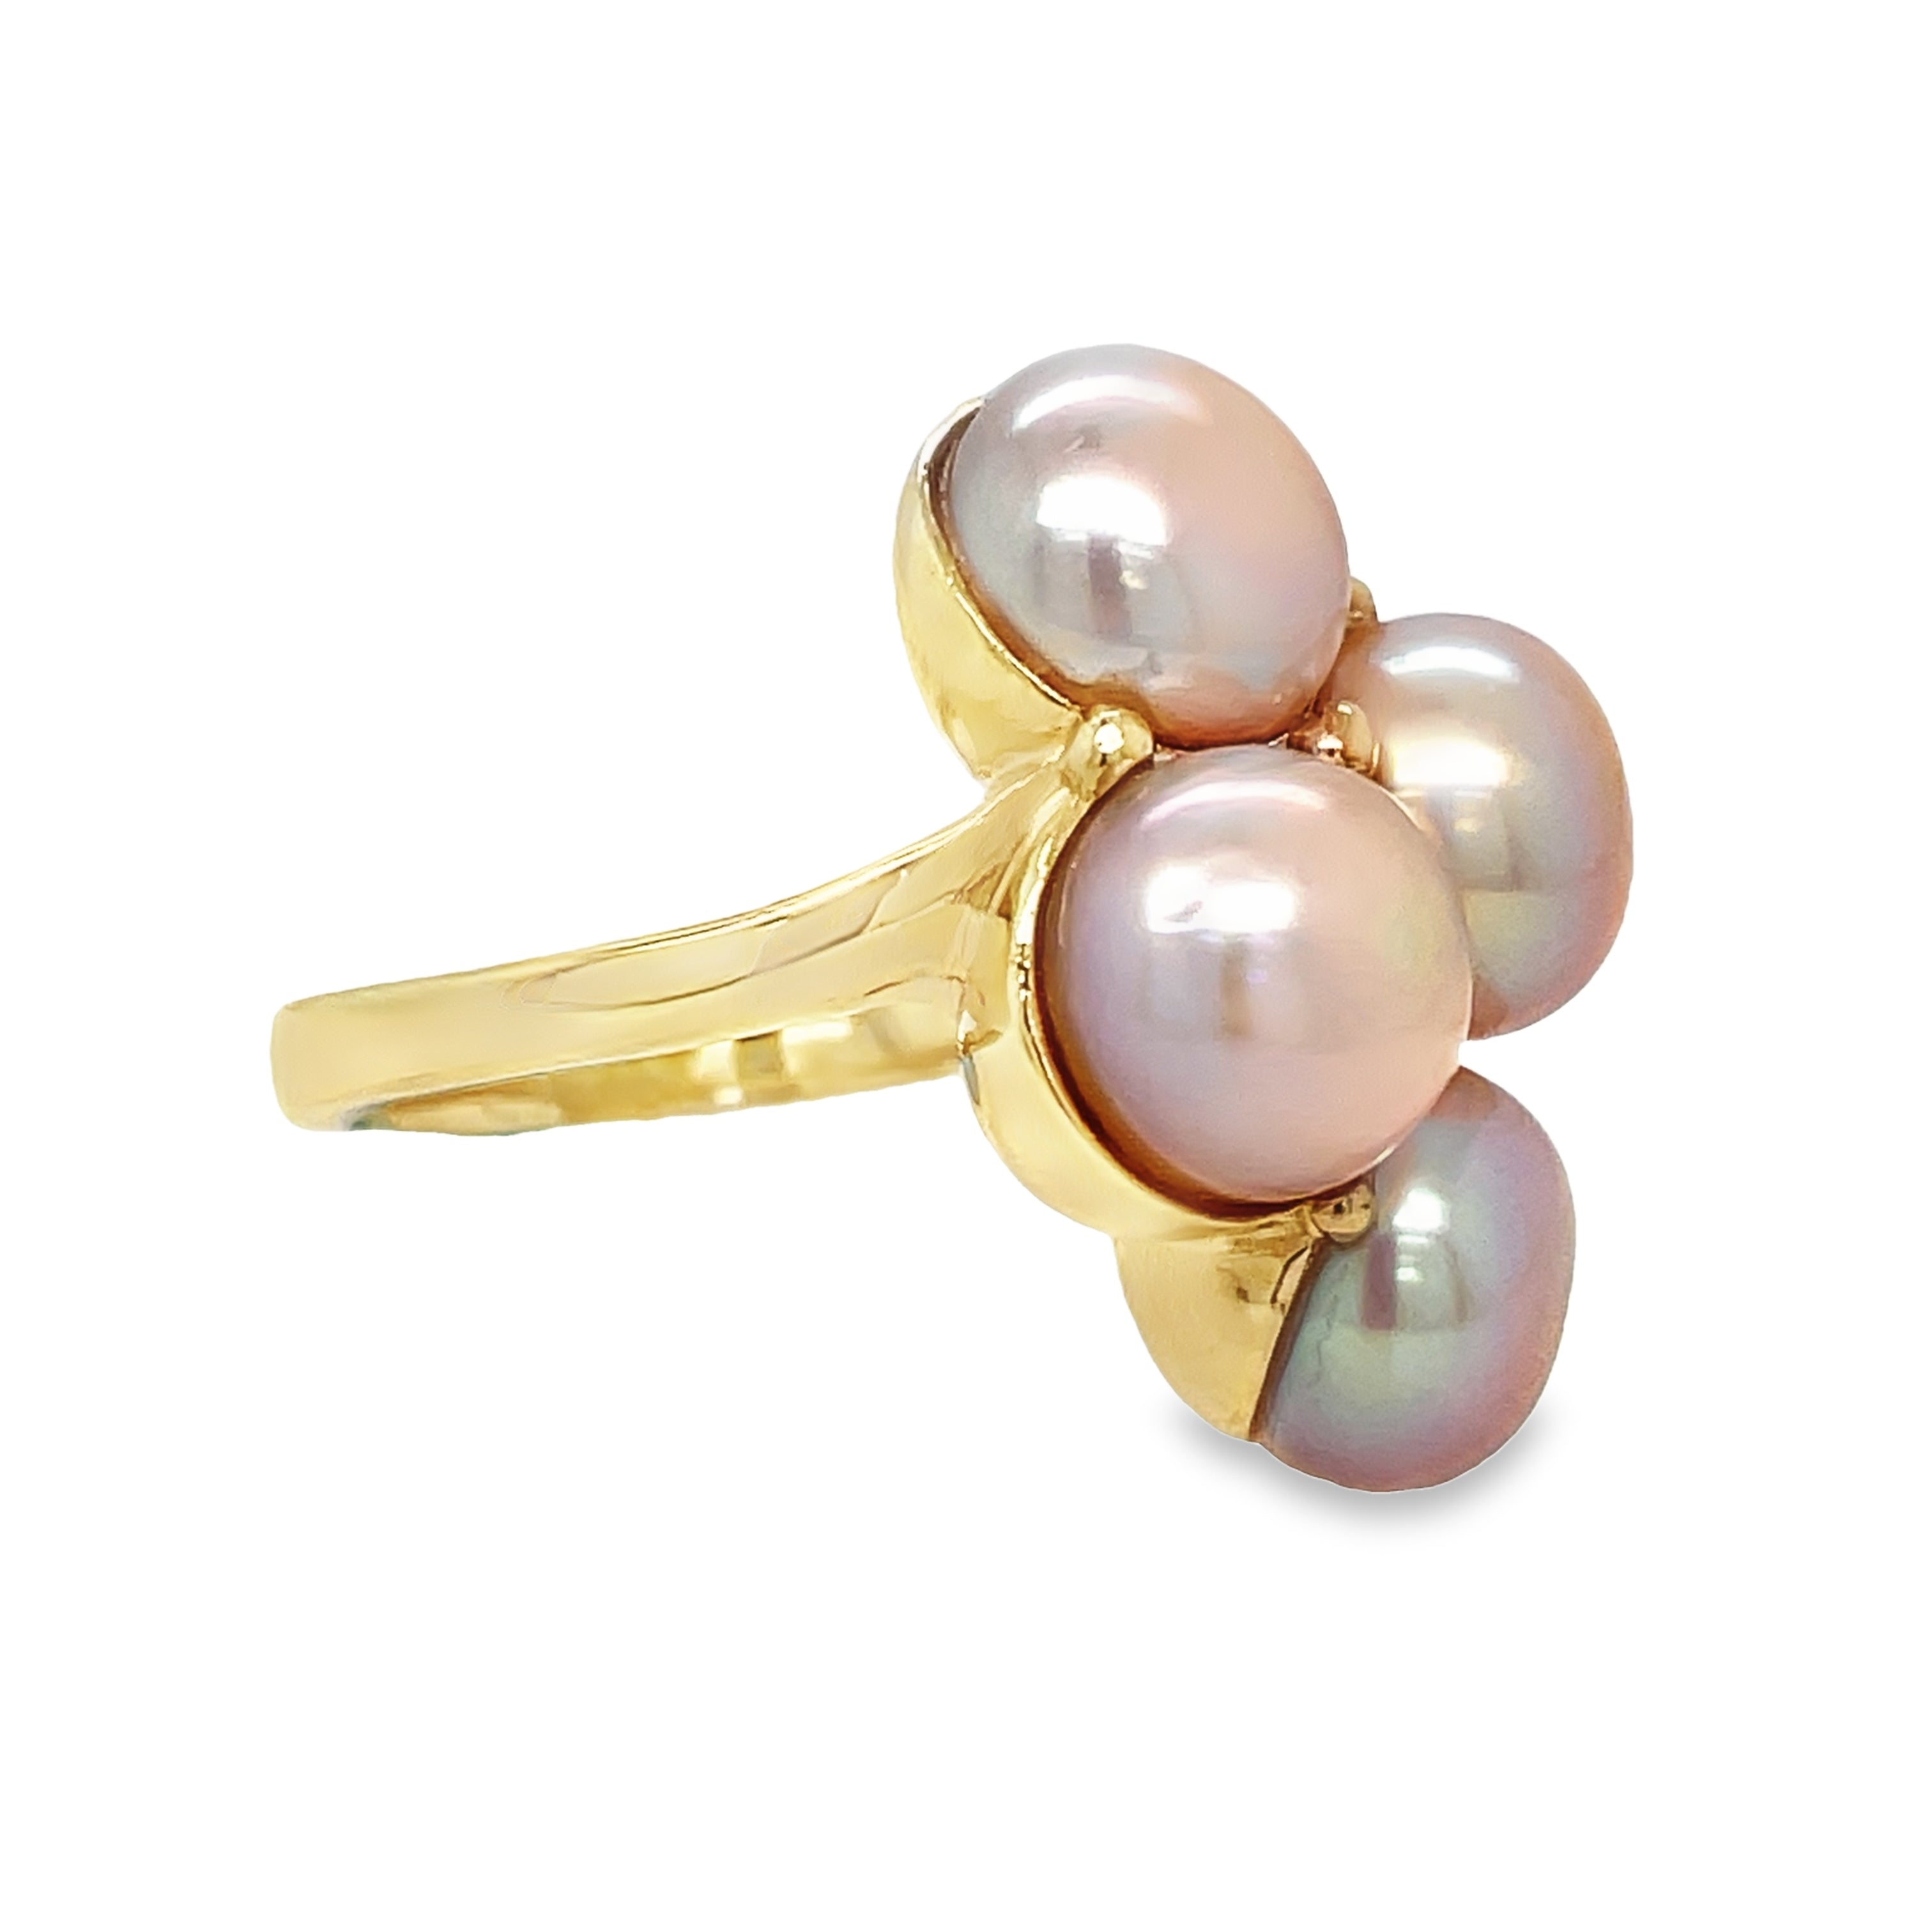 This exquisite Four Pearl Gold Ring showcases a stunning combination of fresh water pearls and 14k yellow gold. With a 6.5 size and solid ring design, it is a must-have for any jewelry collection. Part of our exclusive estate collection, this ring offers both elegance and quality.